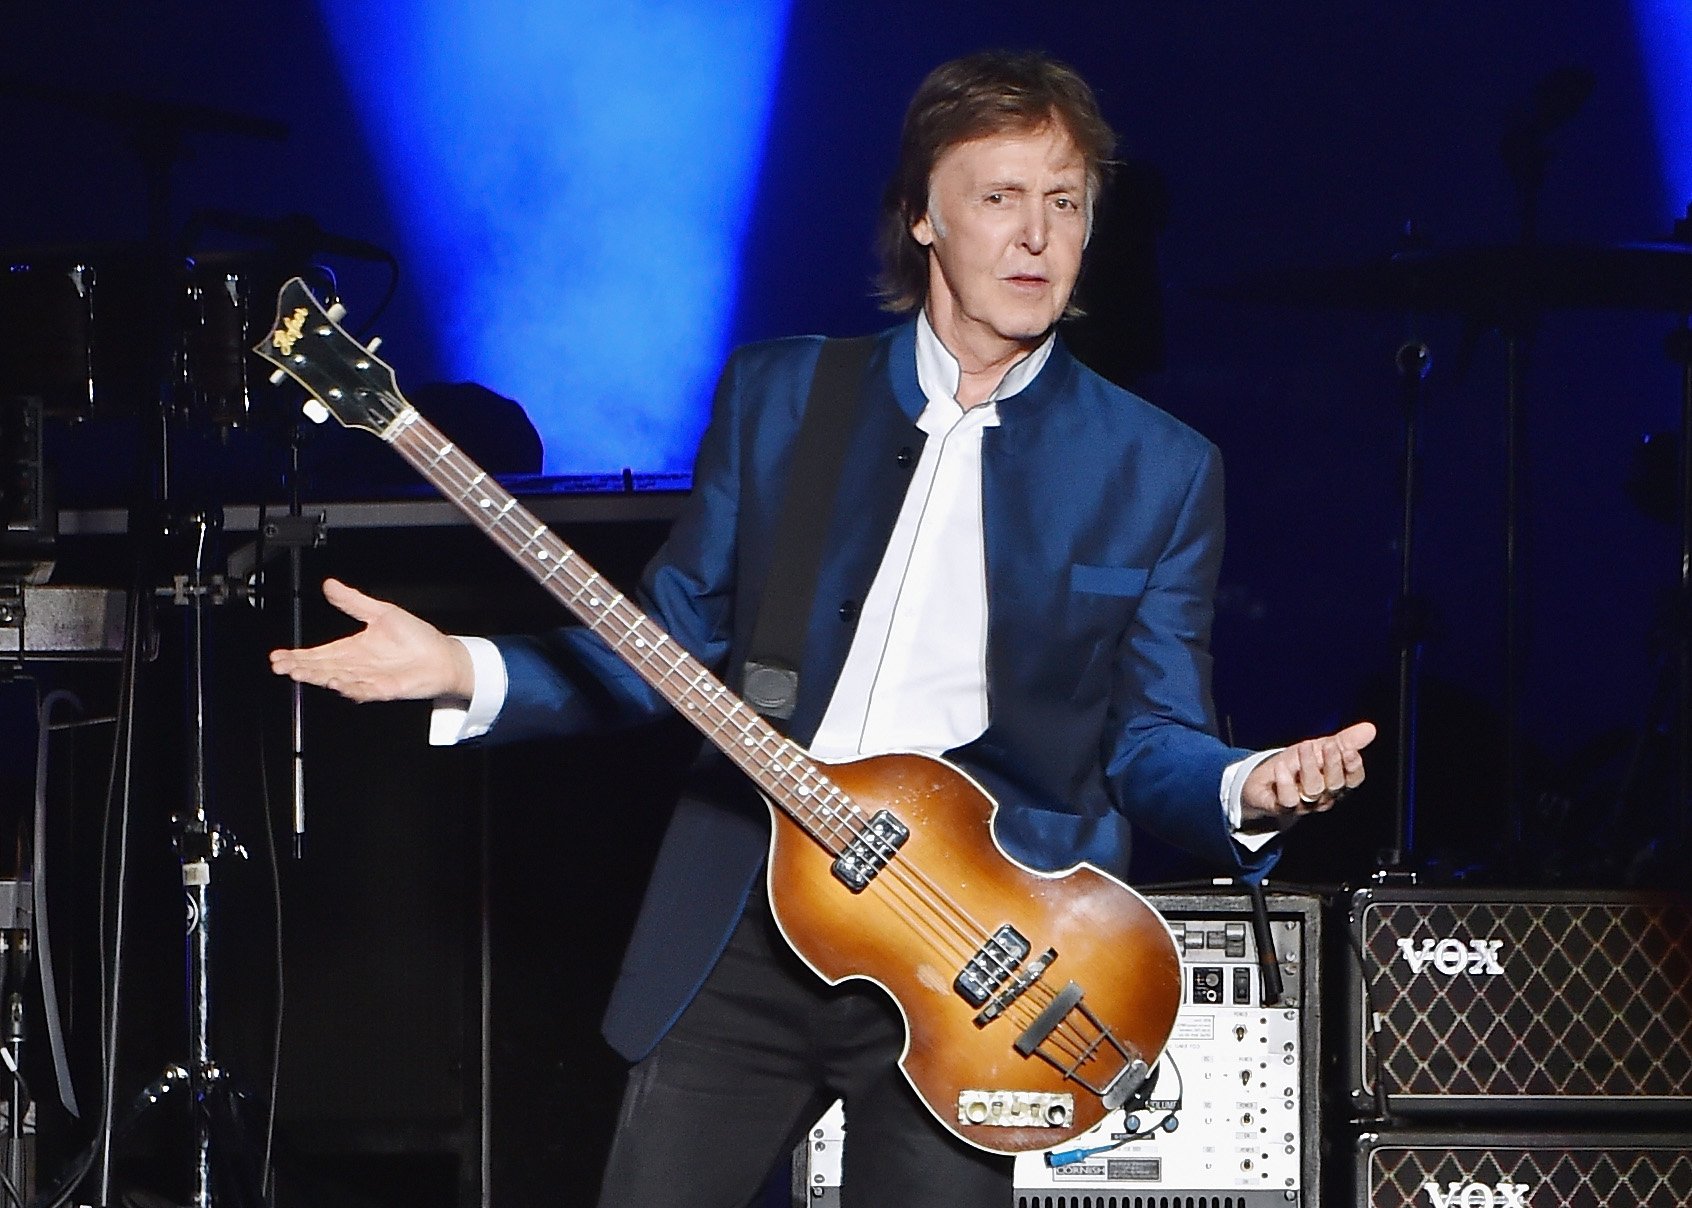 Paul McCartney performs at MetLife Stadium in East Rutherford, New Jersey, in 2016